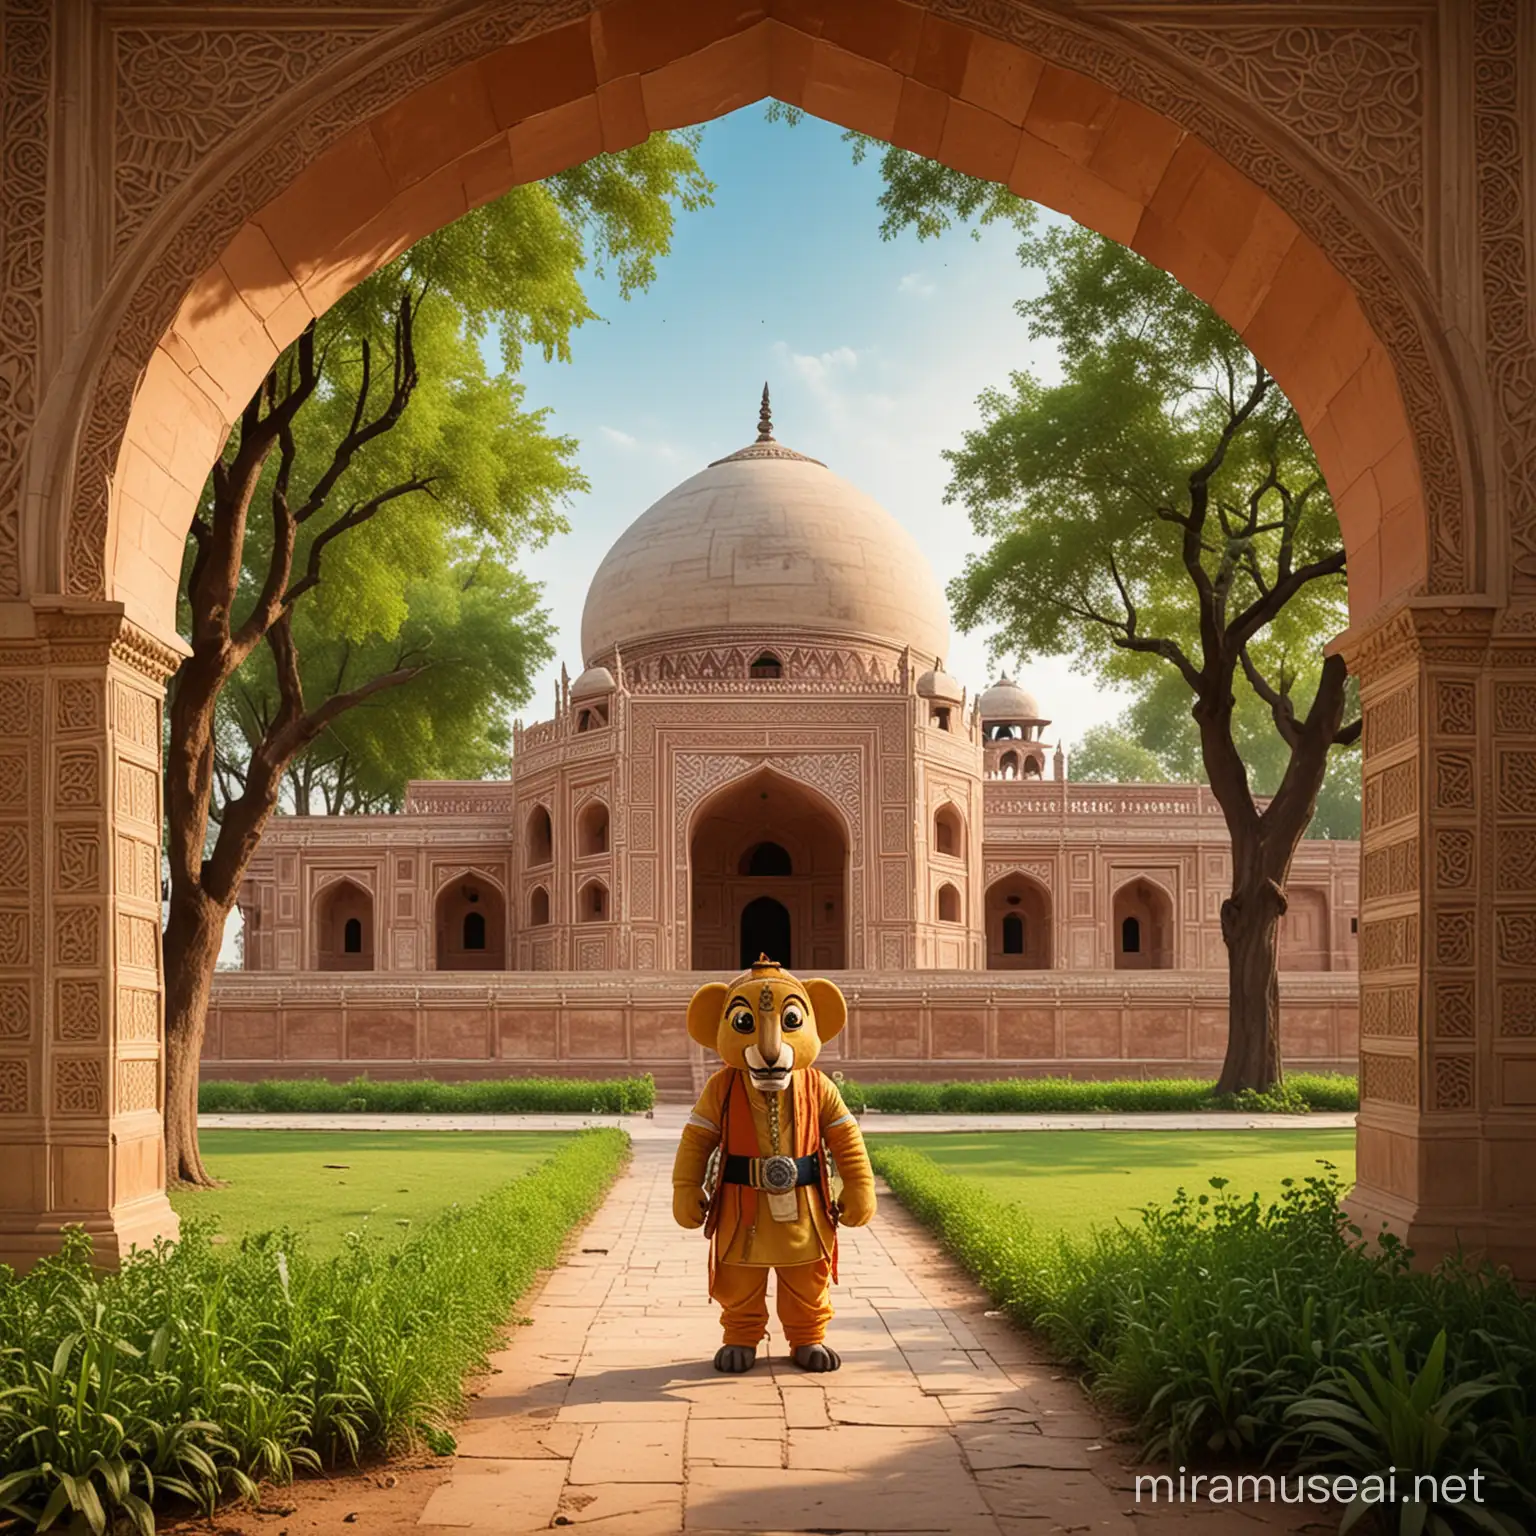 Craft a mascot inspired by a Delhi Humayun's tomb, embodying the spirit of nature's harmony. Dive into the depths of imagination.   Let's explore heritage through the lens of nature with yours designed mascot for "Seeing heritage through the eyes of nature."